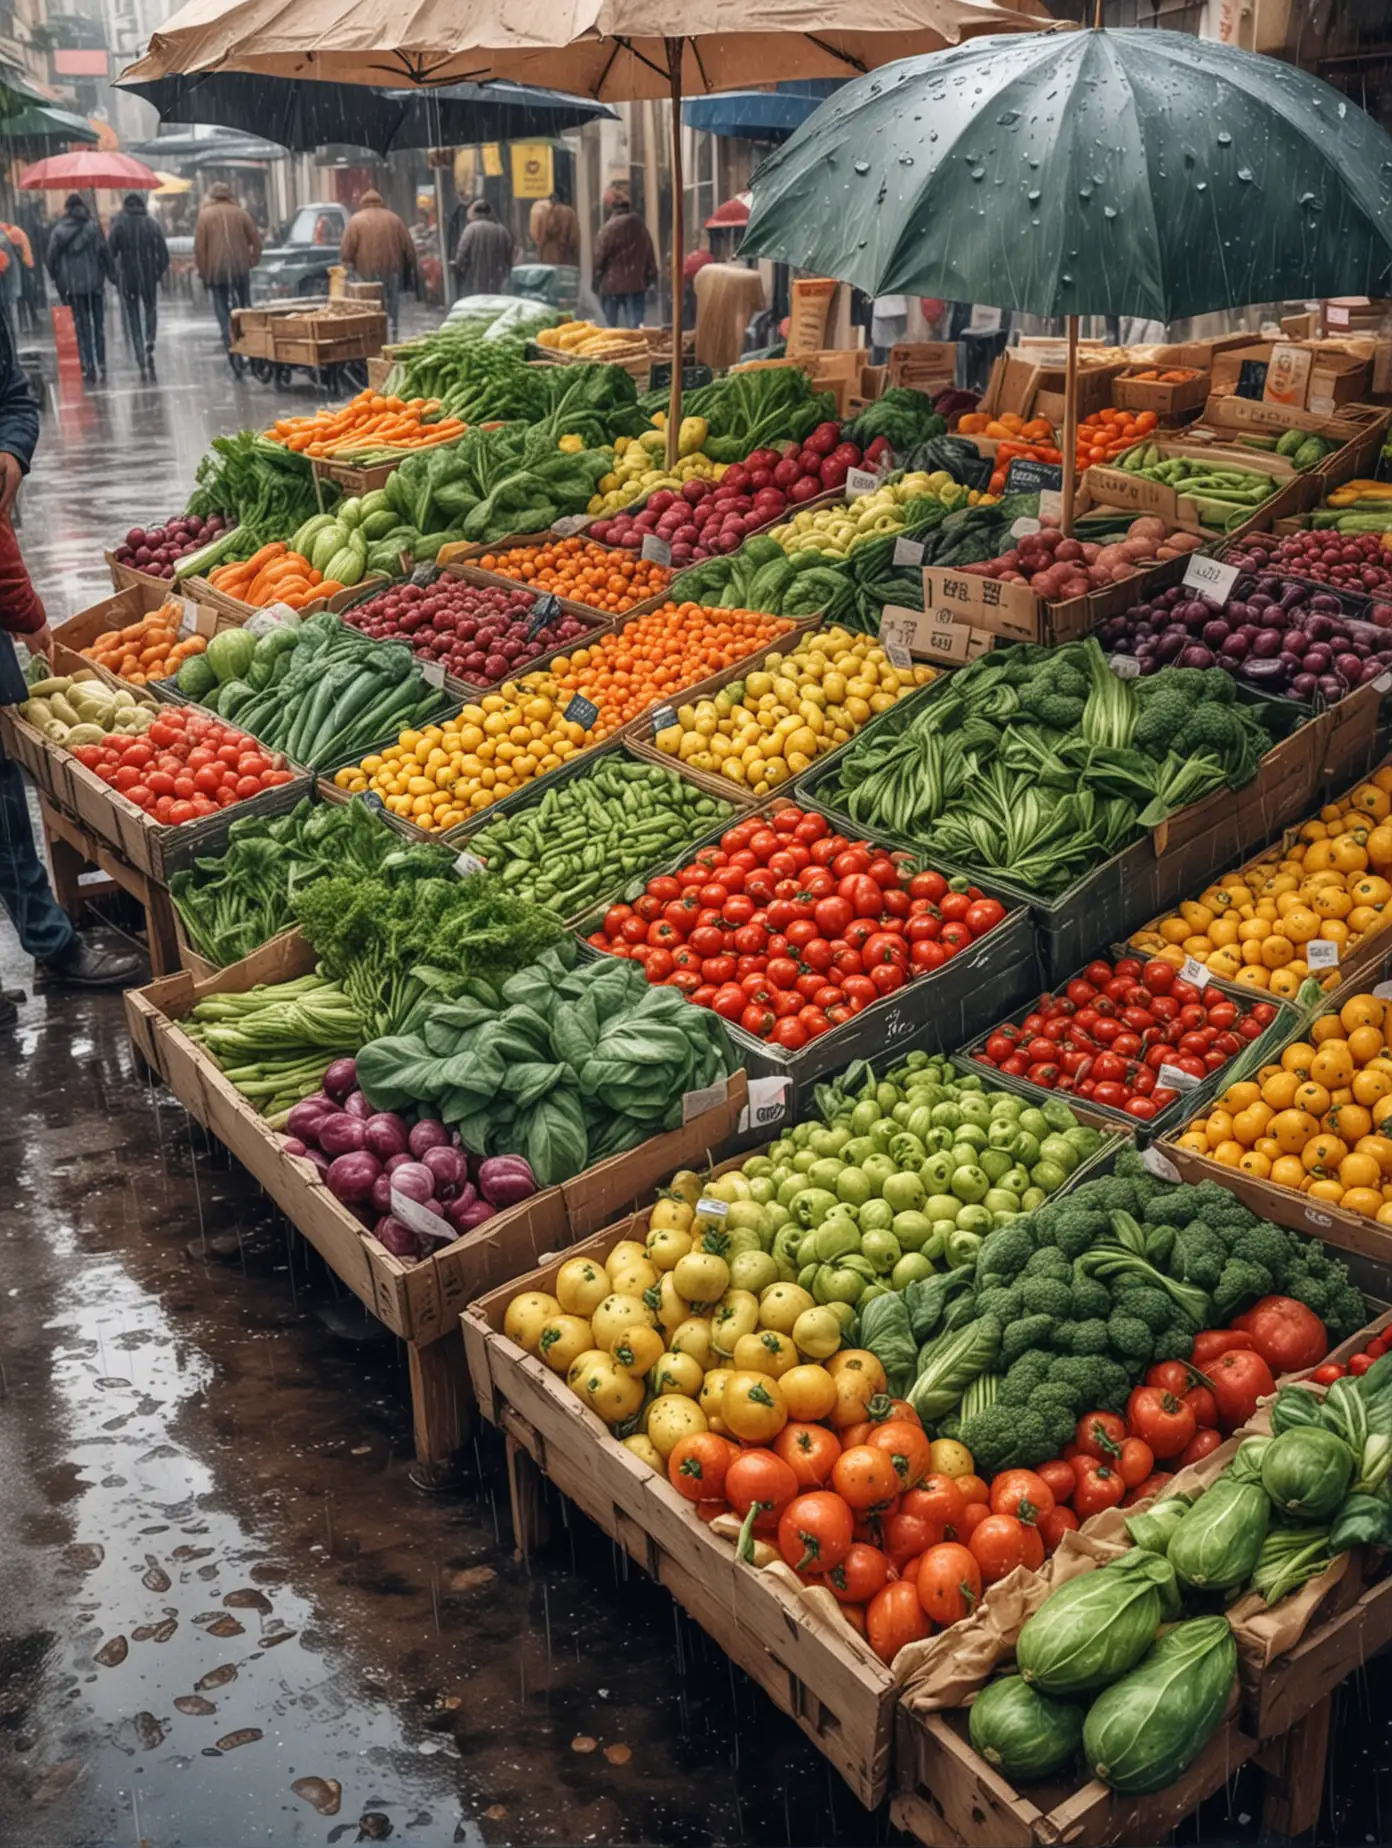 Colorful Market Illustration Vibrant Fruits and Vegetables in a Romantic Rainy Setting